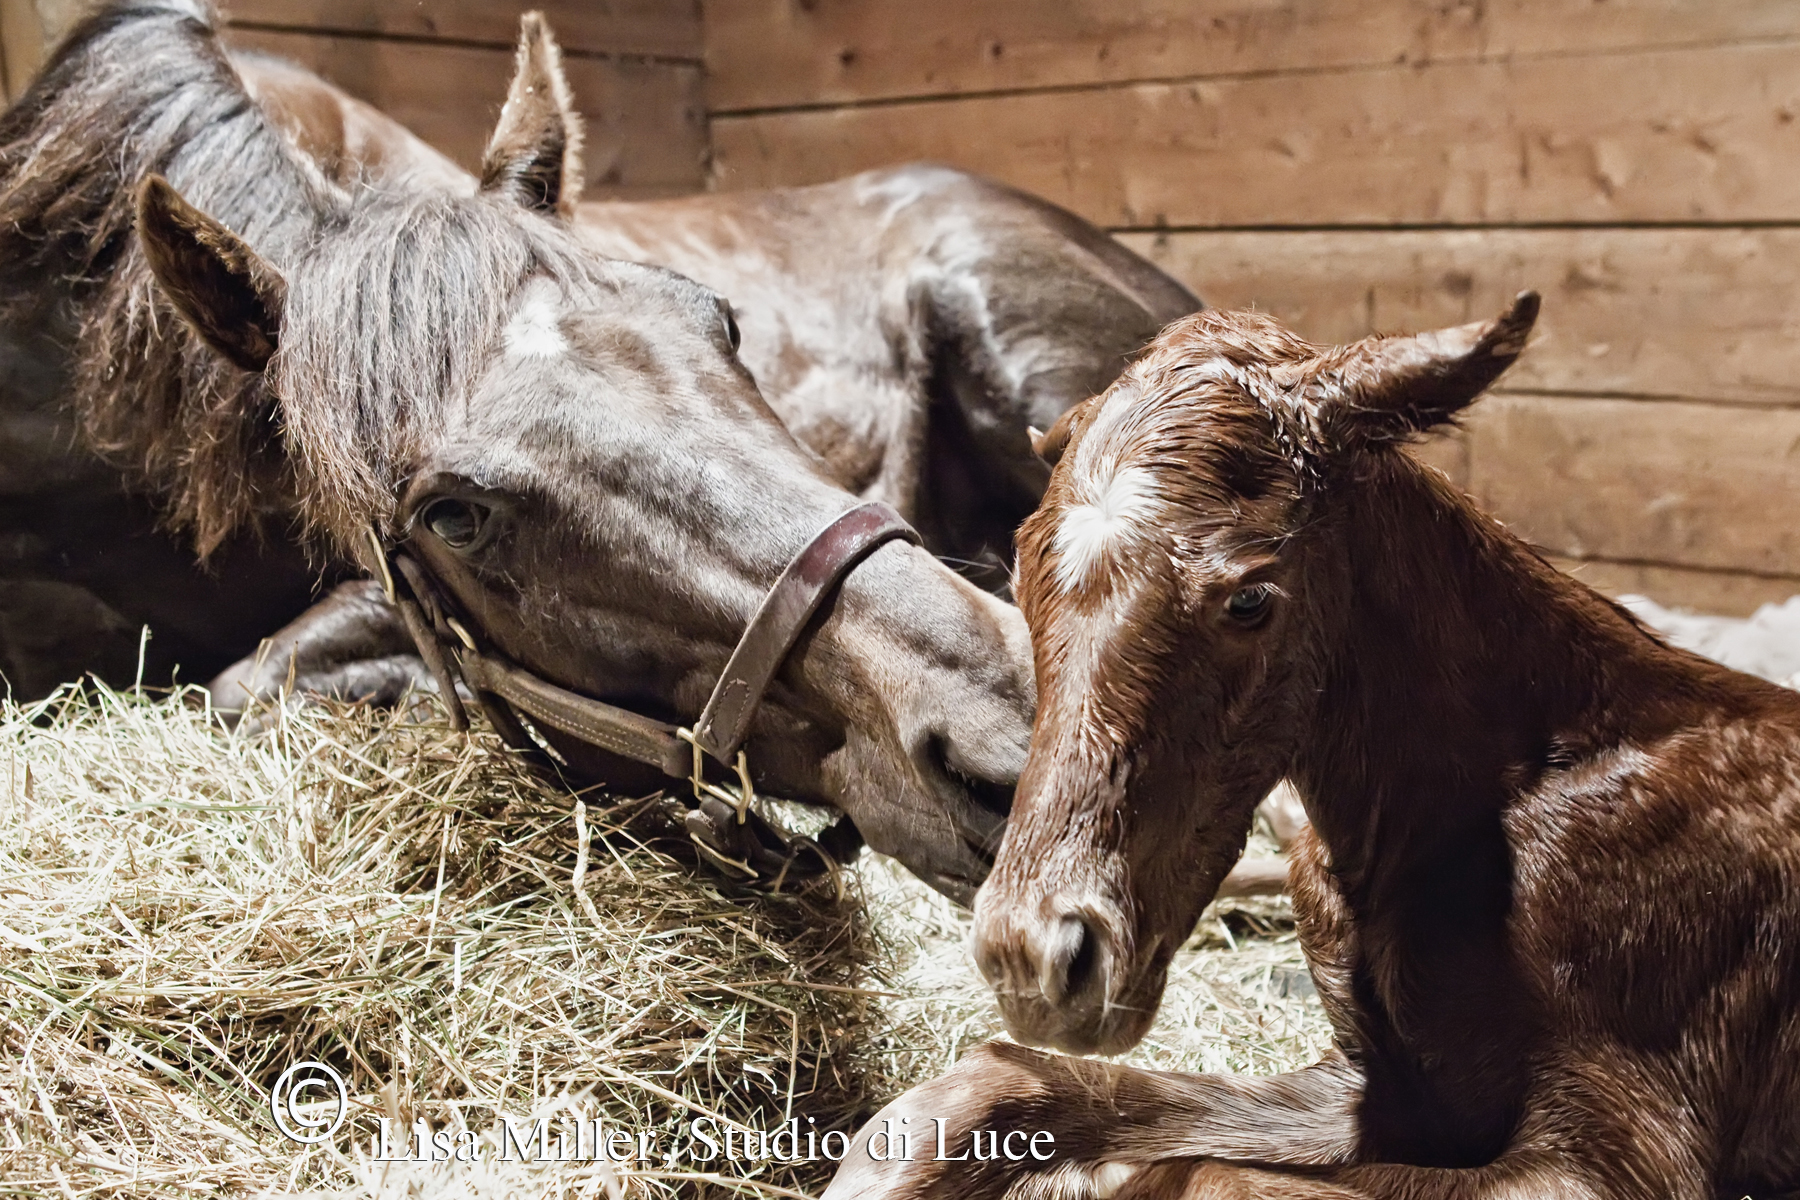 Lisa Miller has photographed more than 50 New York thoroughbred foalings.